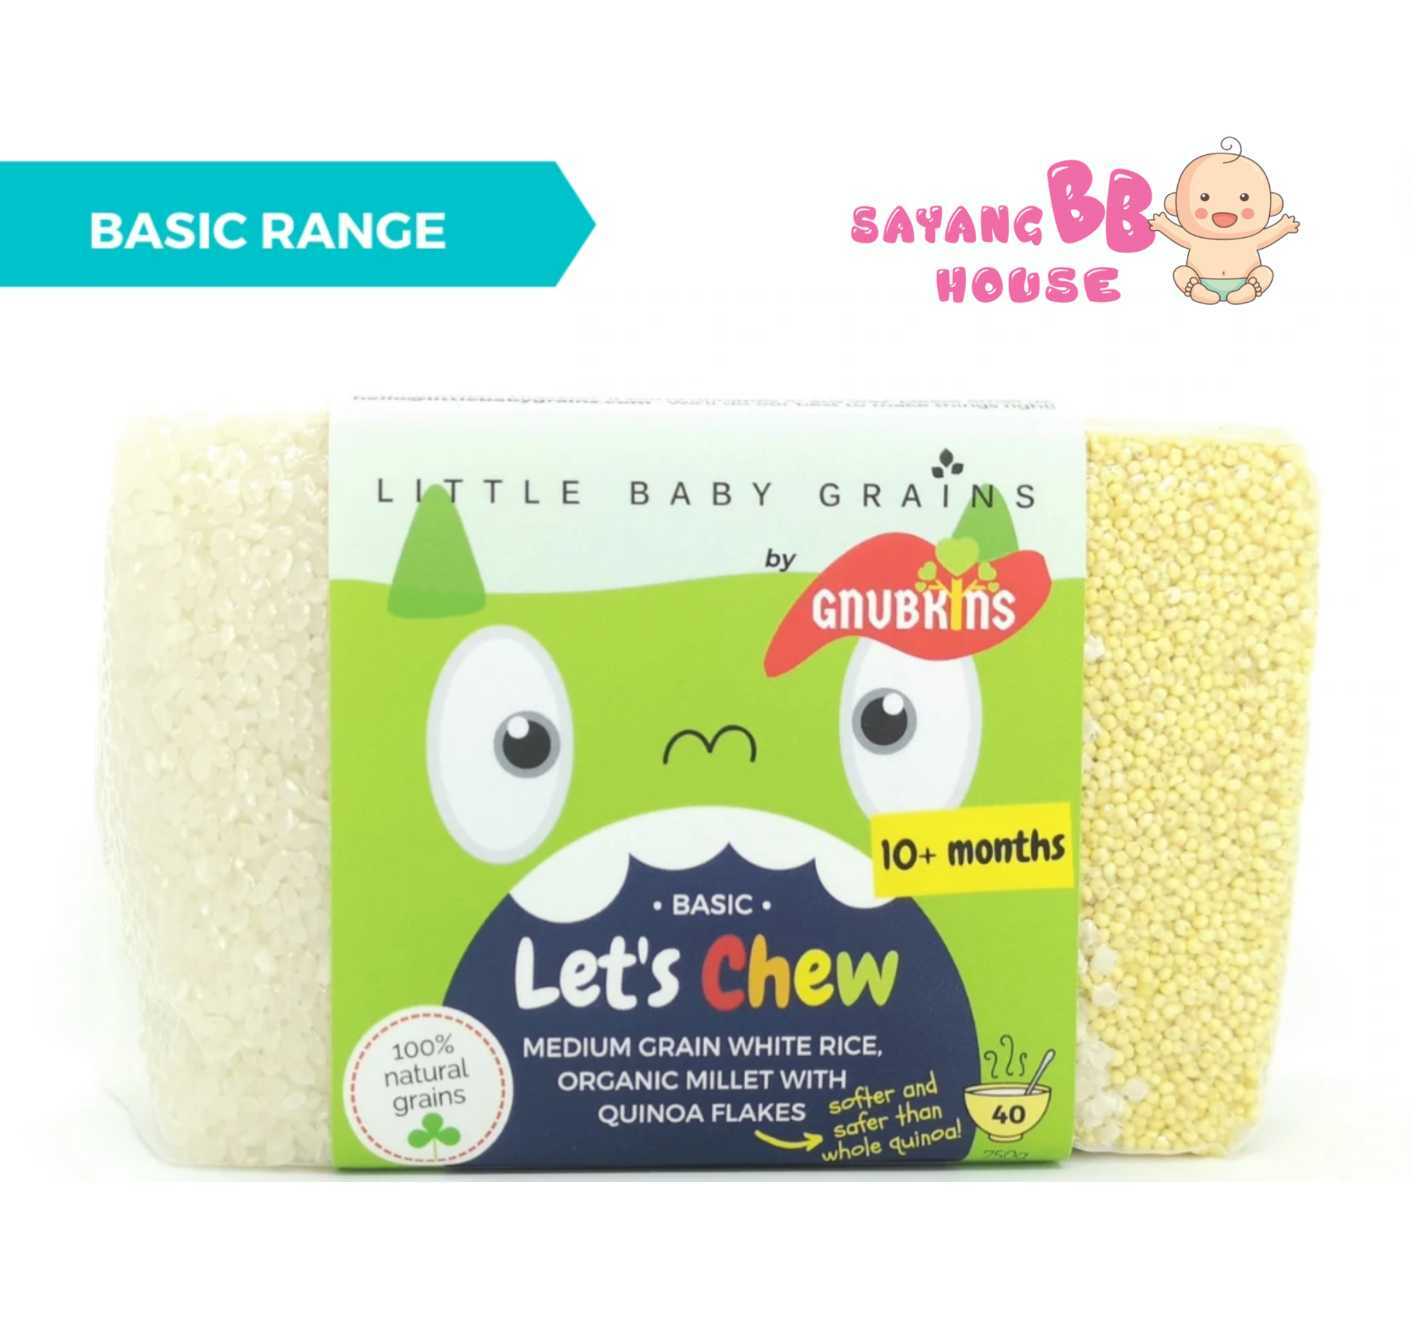 Let's Chew from 10 months (BASIC Range) Baby food